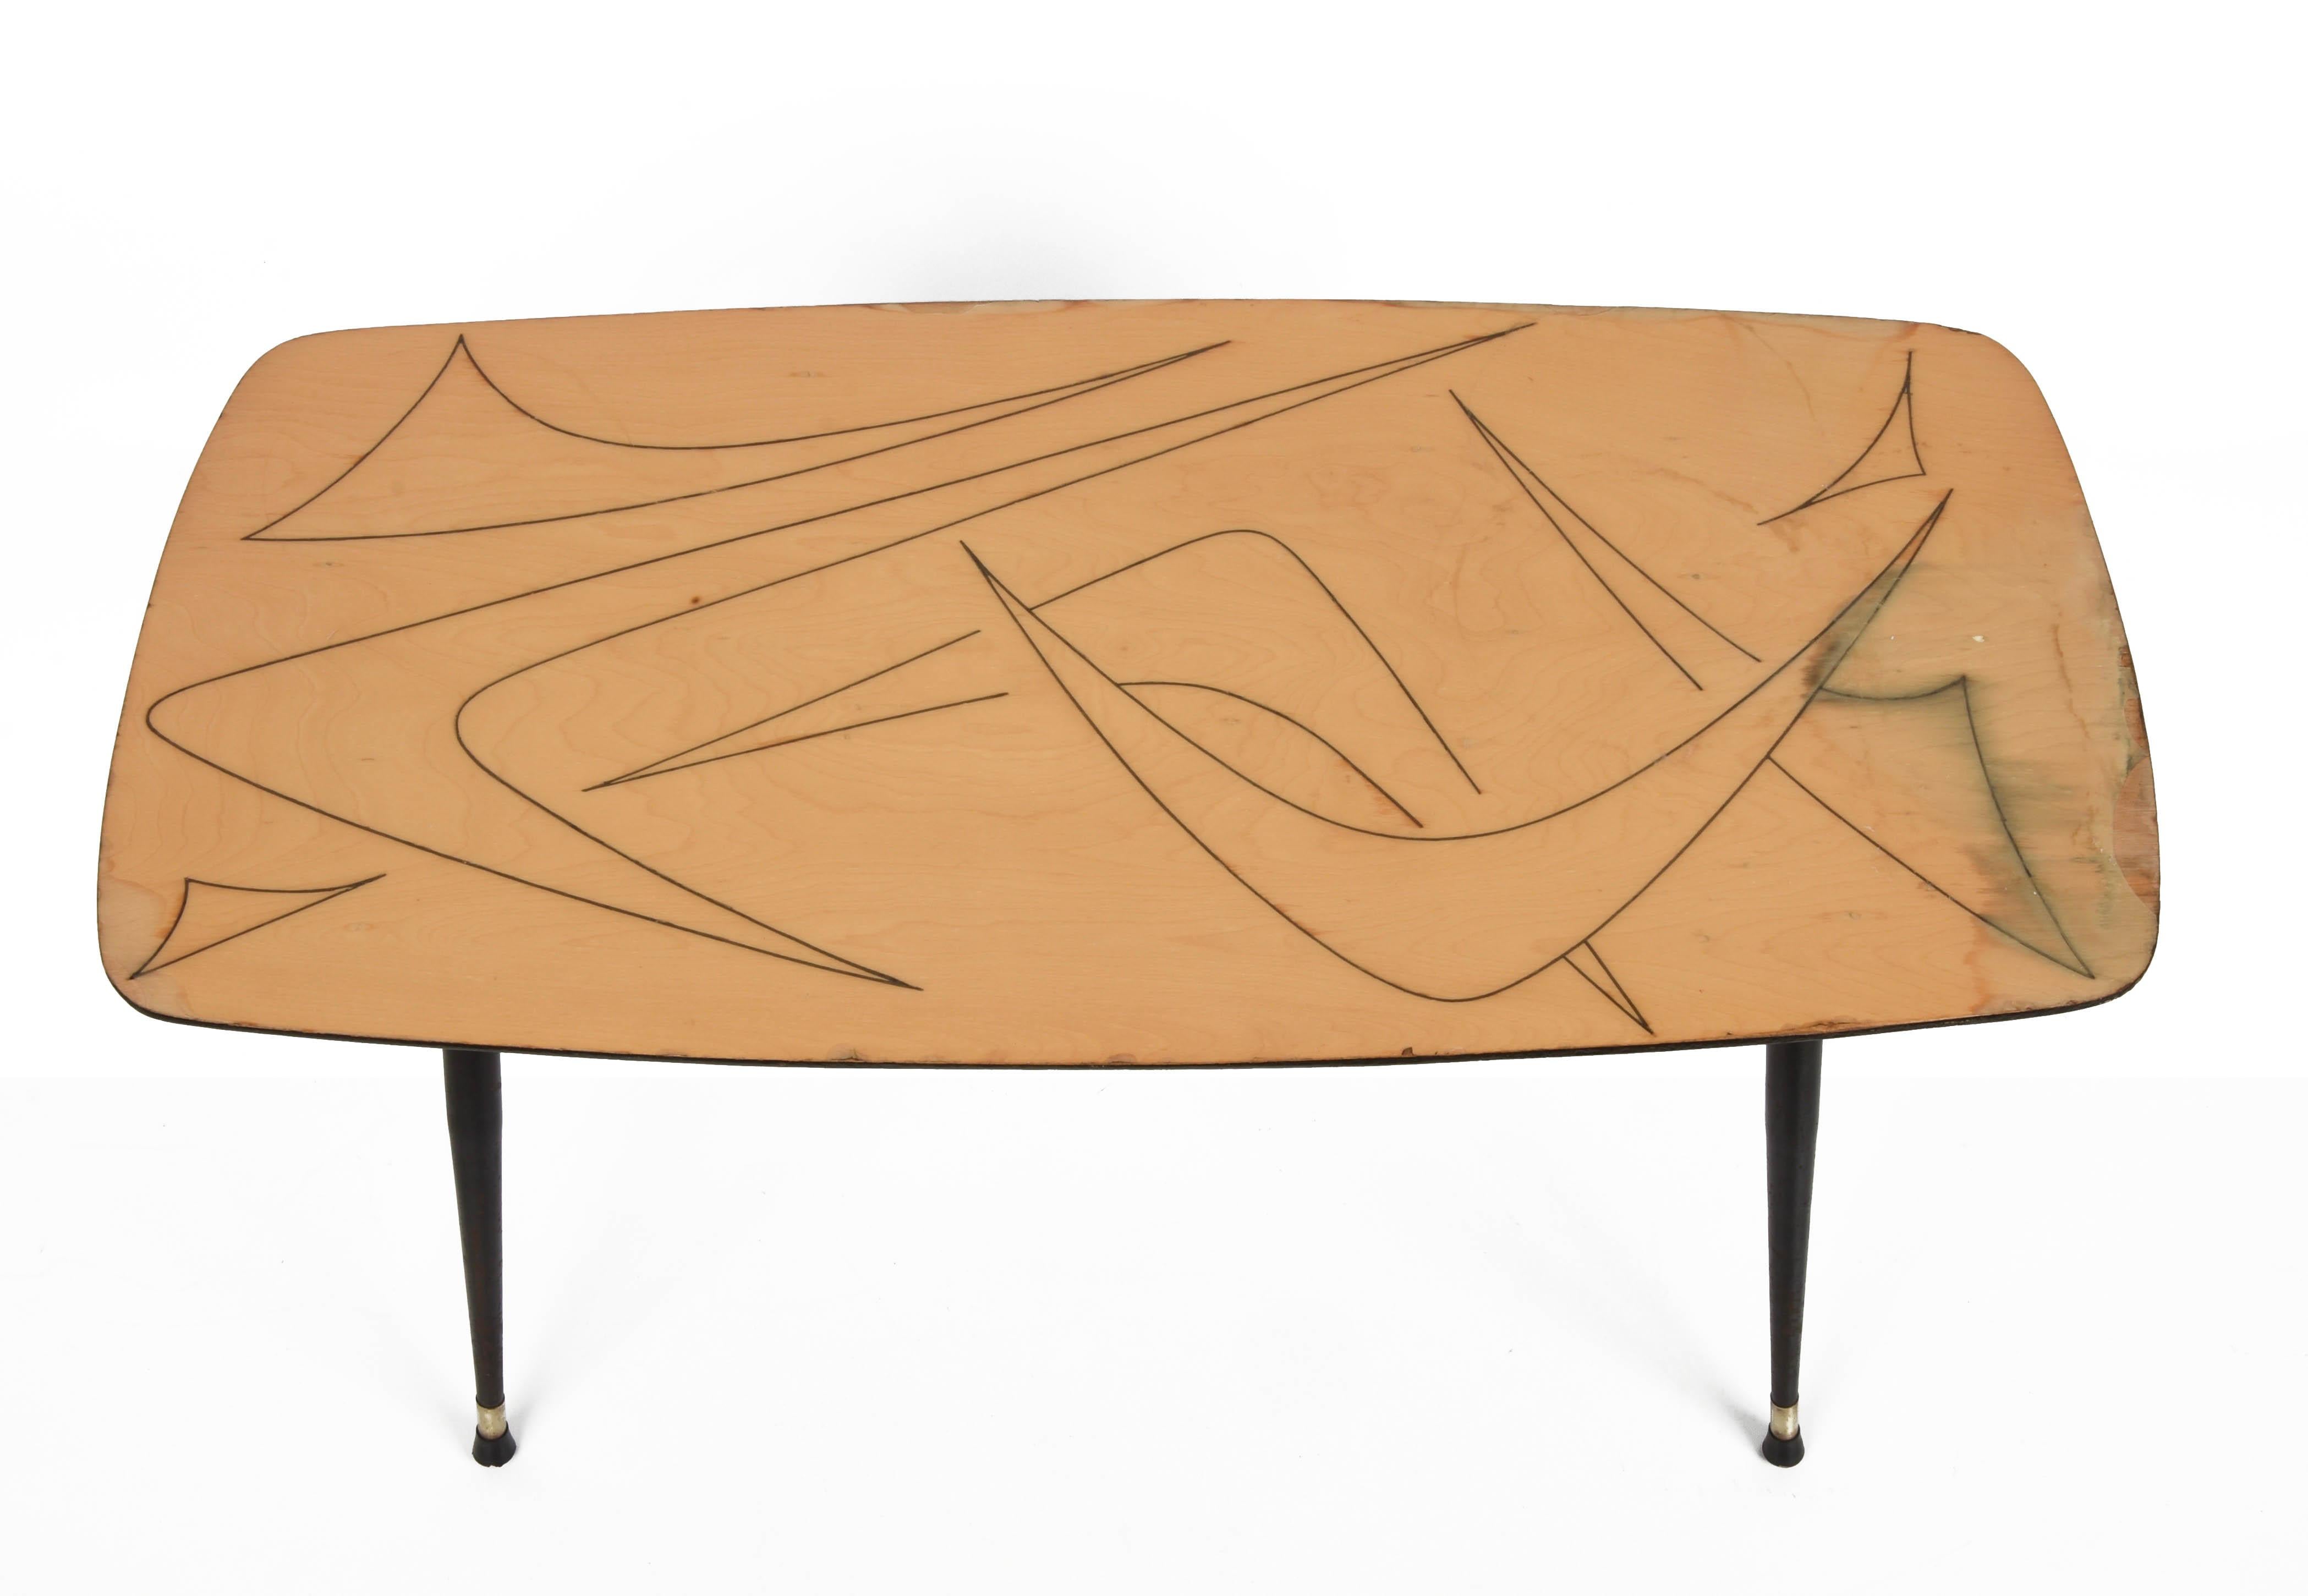 Midcentury Italian Painted Wood, Brass and Black Metal Coffee Table, 1950s For Sale 1